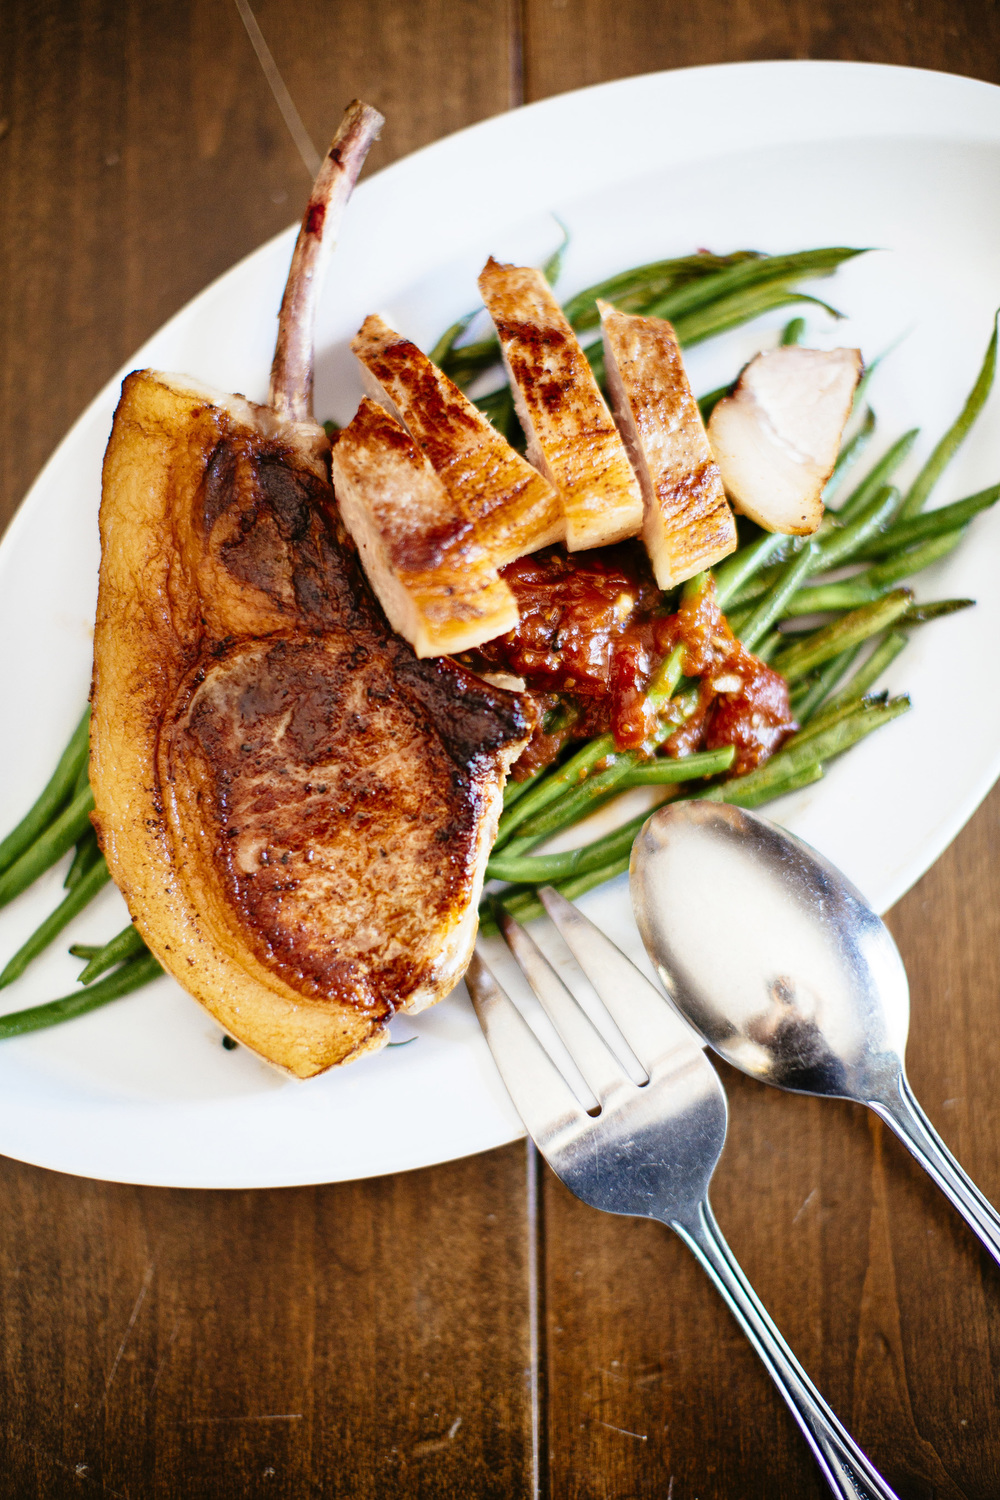 Seared and Sous Vide Pork Chop with Green Beans and Tomato